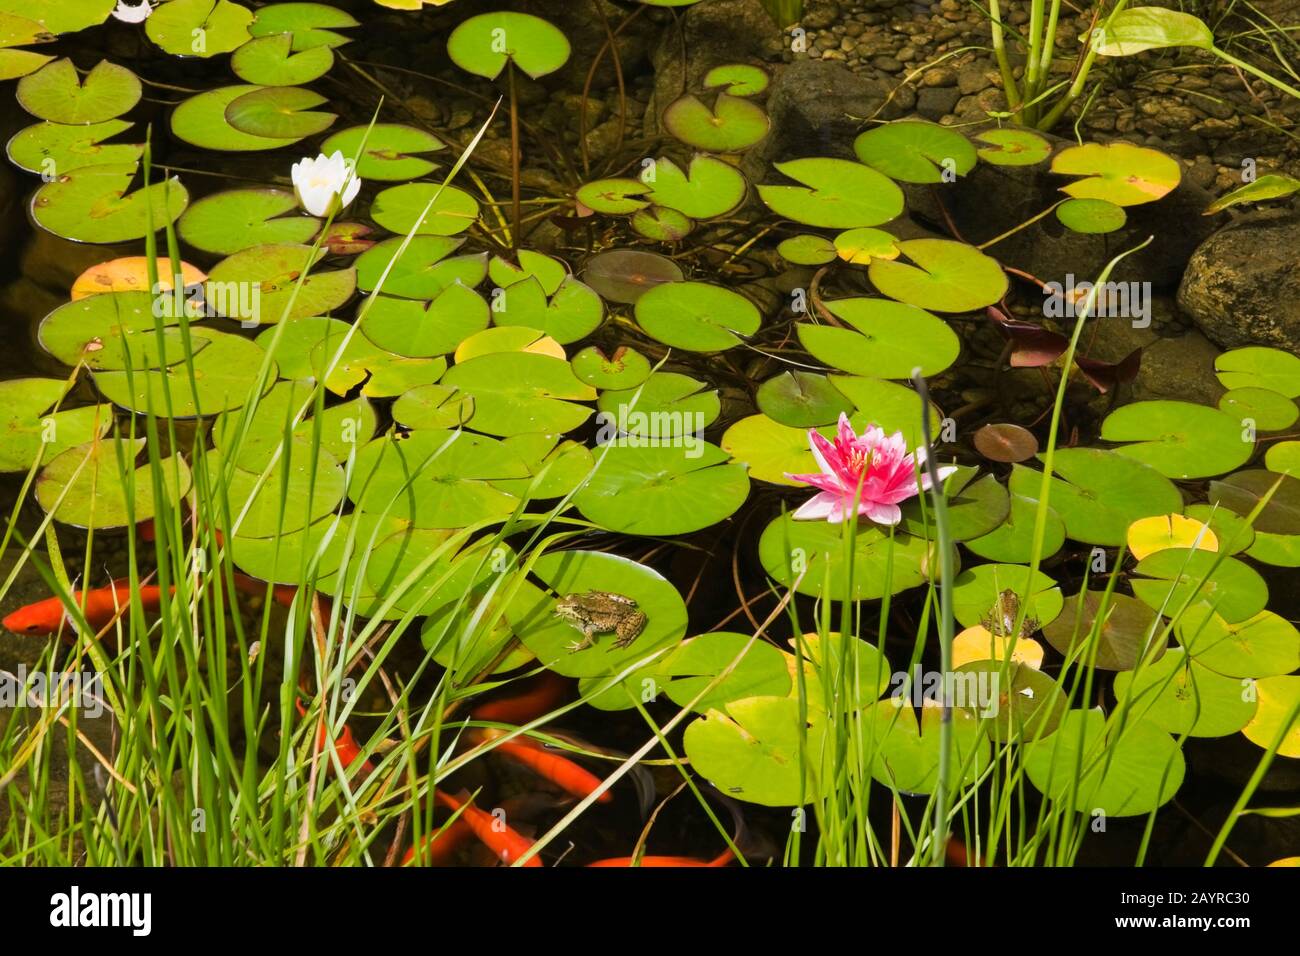 Typha minima - Dwarf Cattails, pink Nymphaea 'Attraction' white 'Gonnere' -Water Lilies, Pondeteria cordata - Pickerel Weed, Carassius auratus in pond Stock Photo